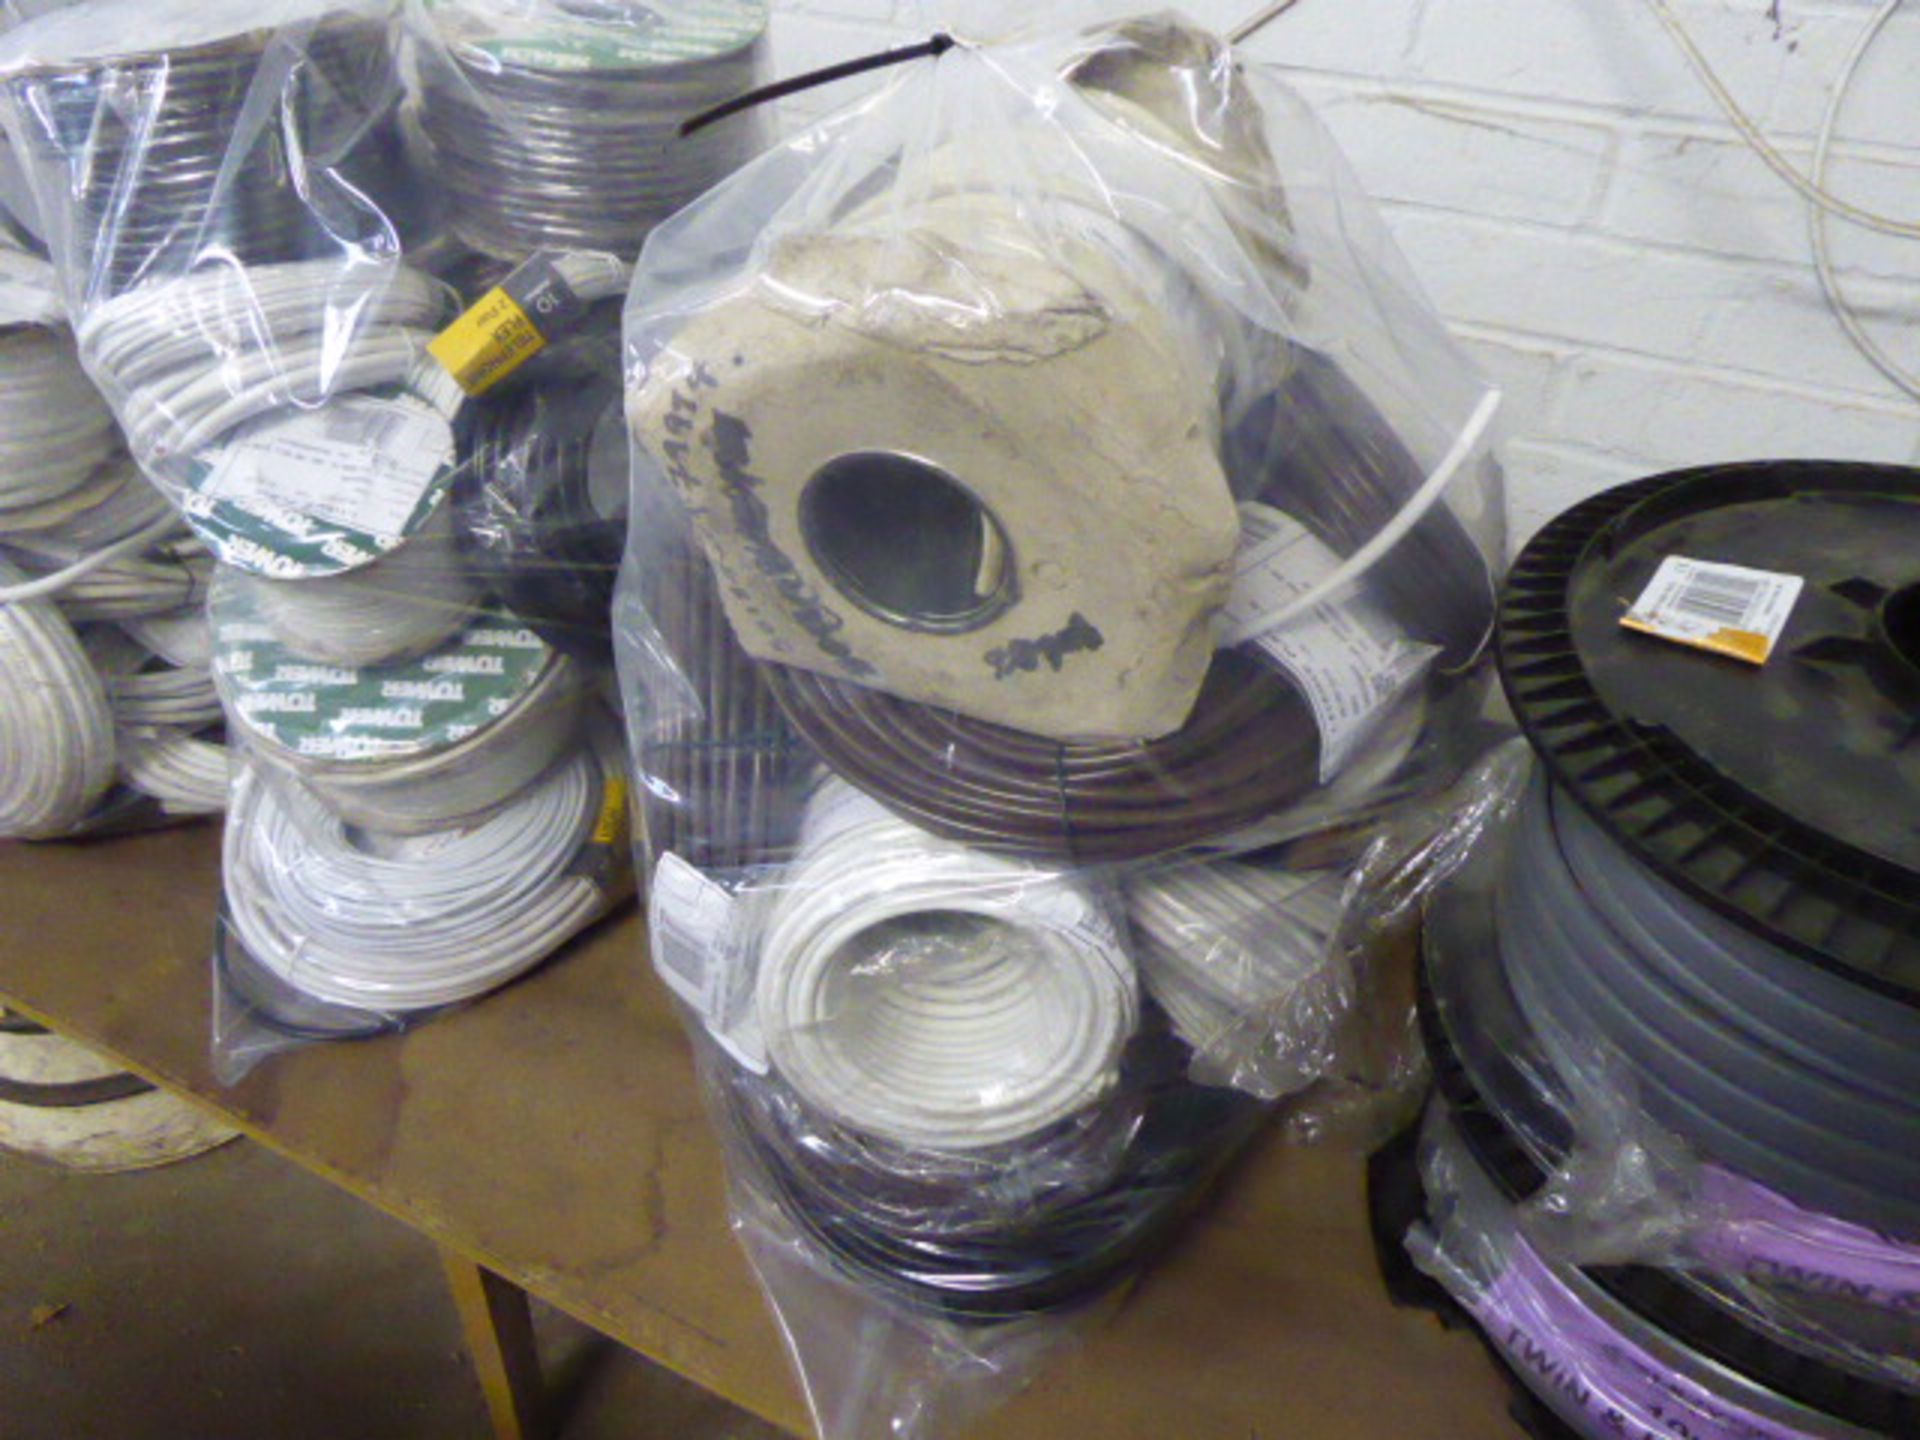 Bag of coaxial, telephone and satellite cable